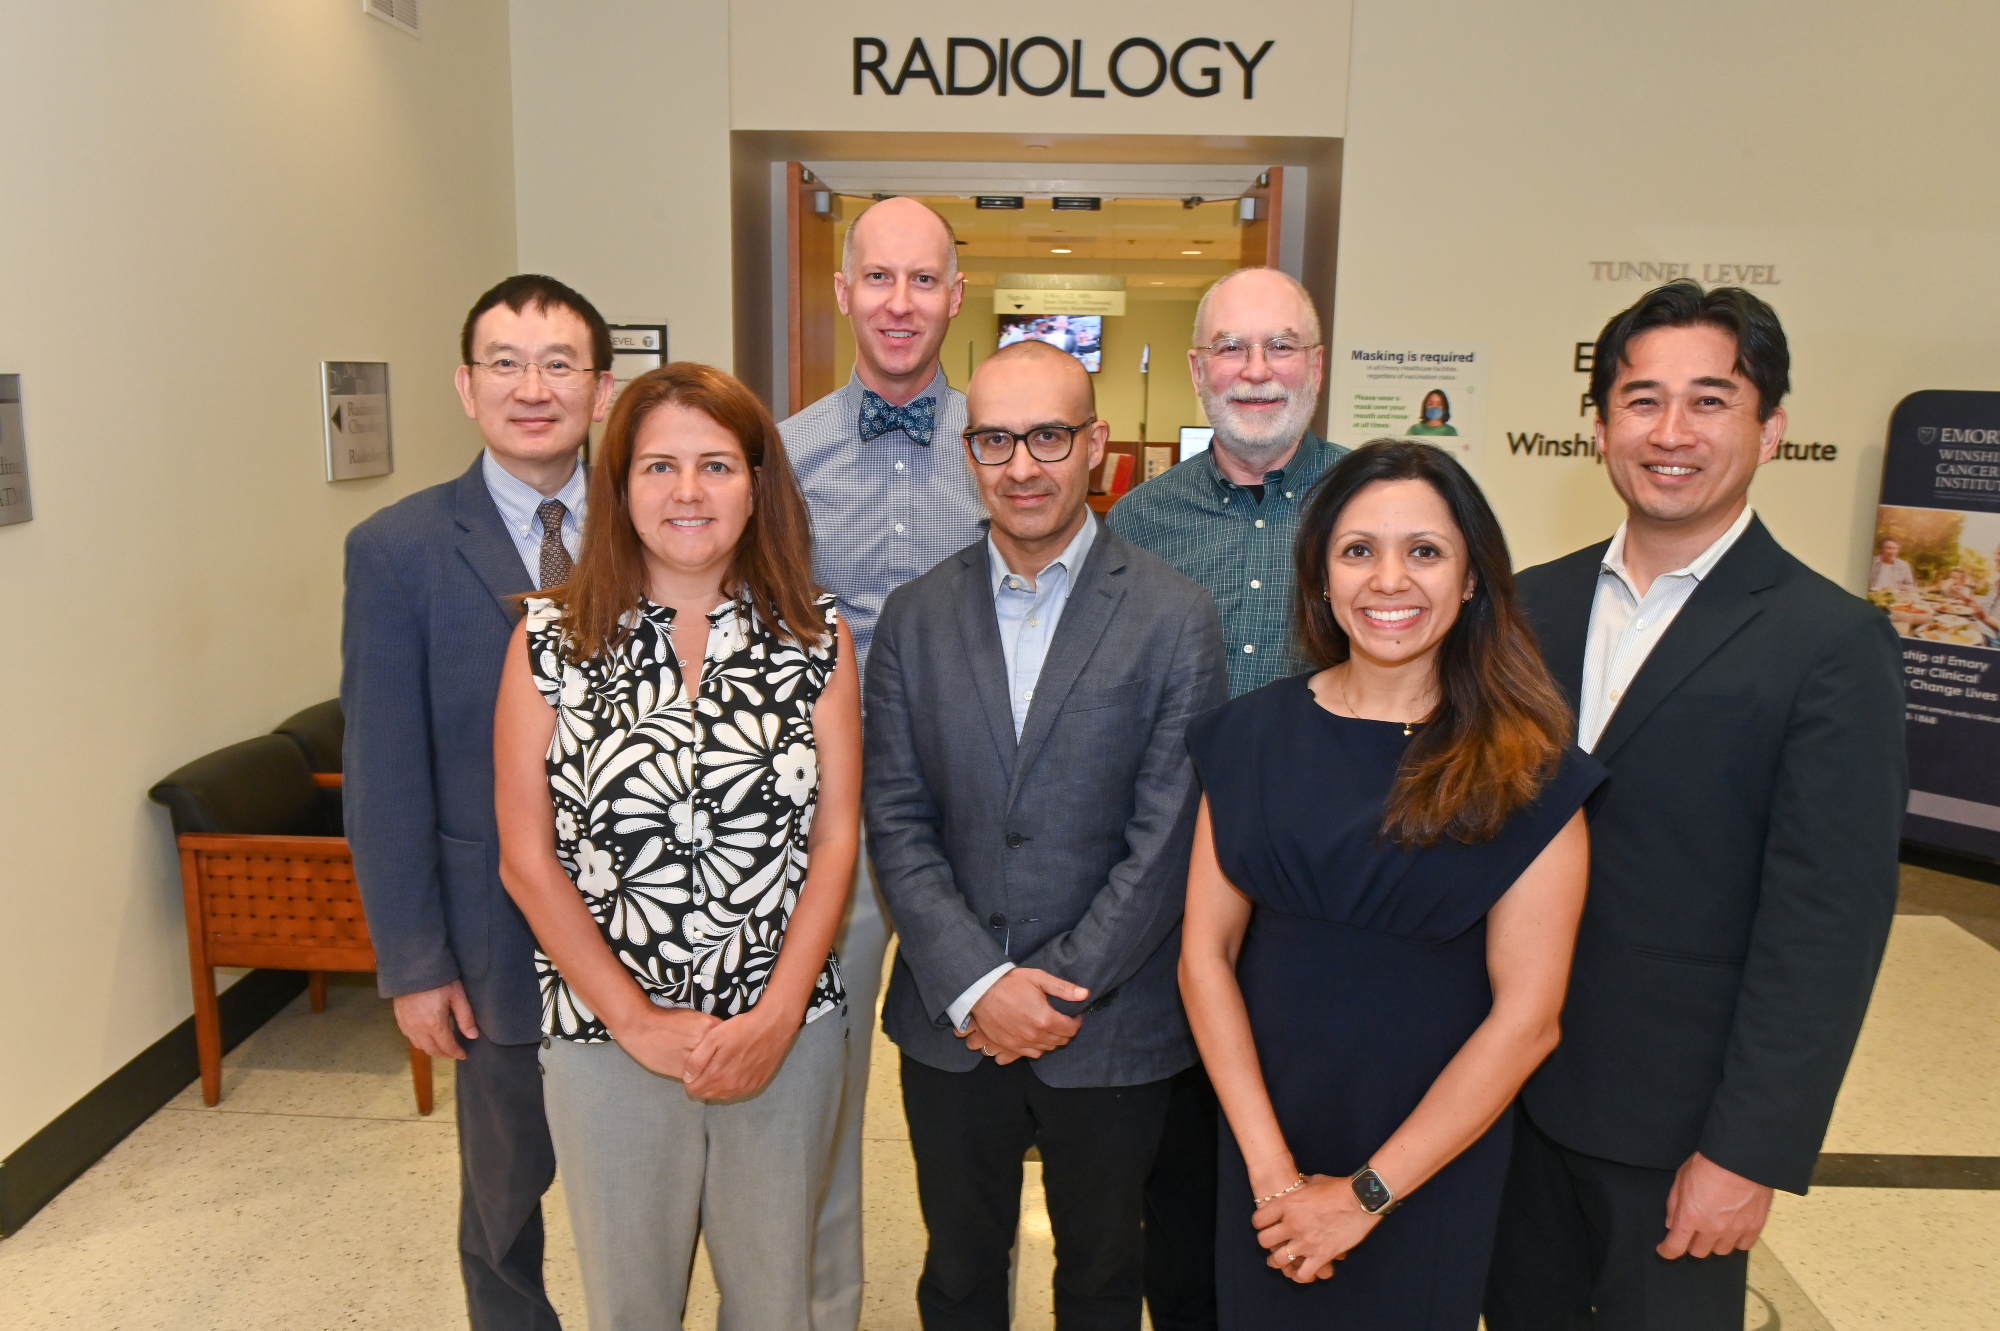 seven people standing in a hallway together with the words Radiology on the wall behind them